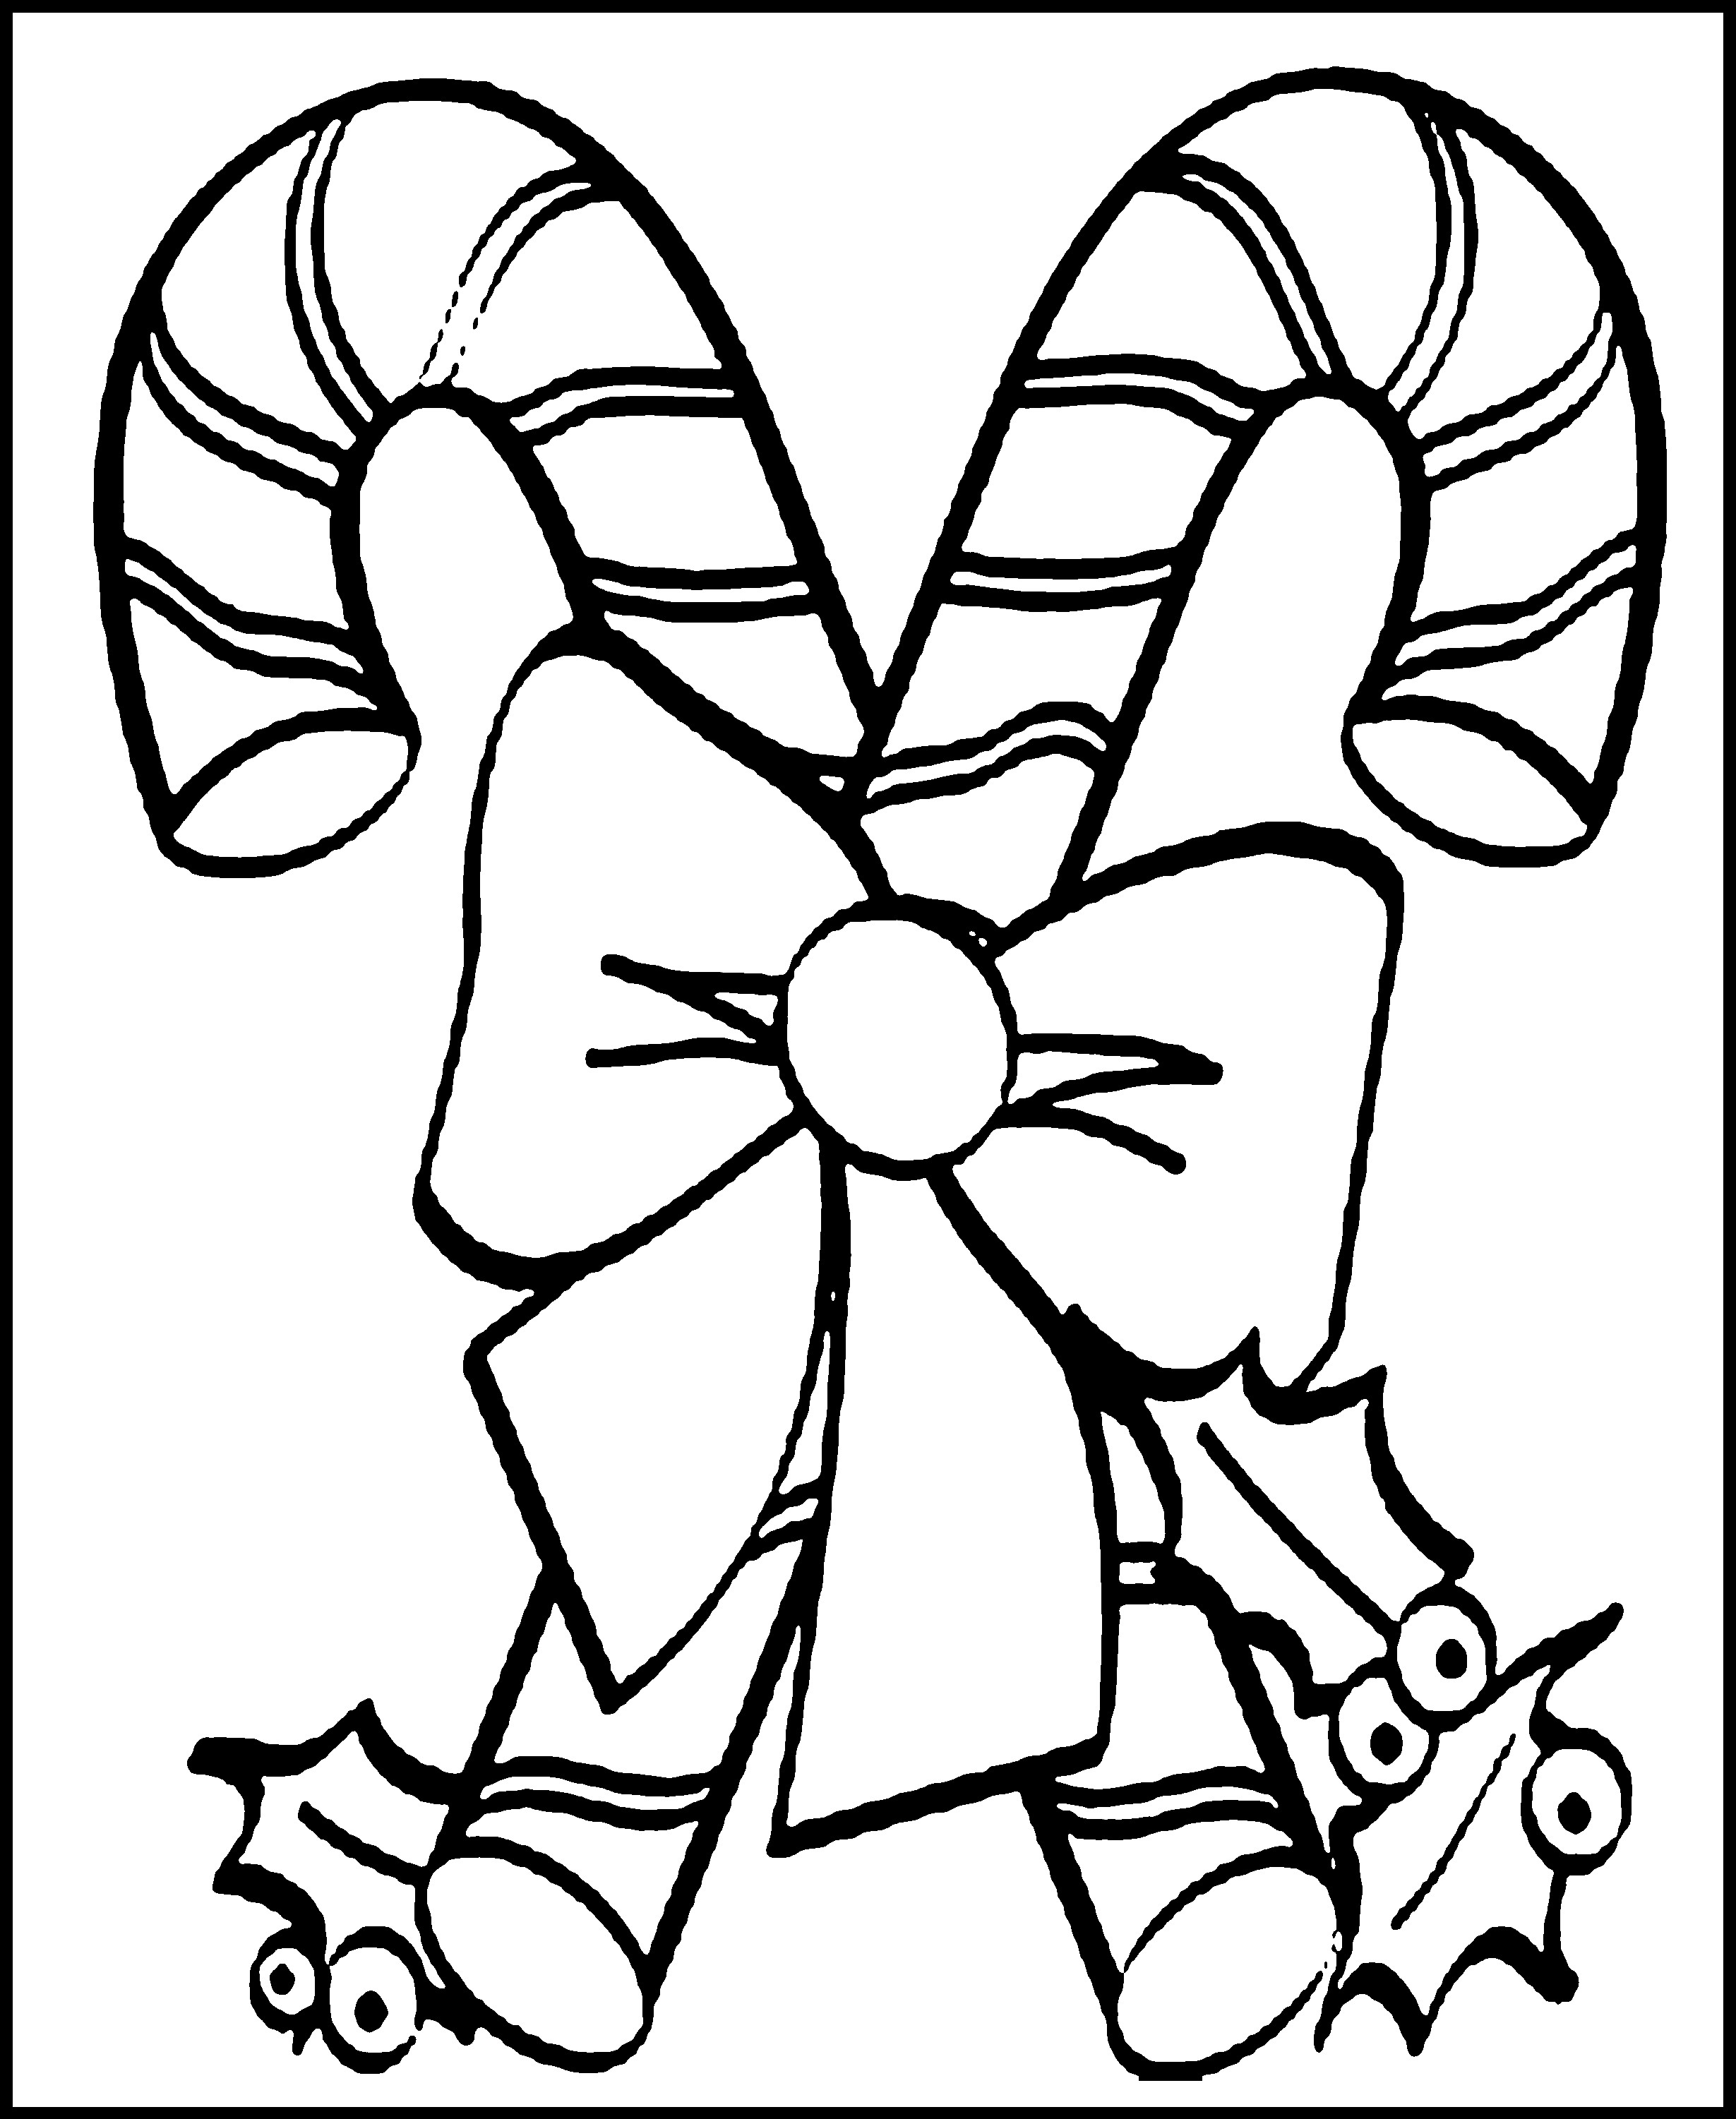 Christmas Coloring Pages For Kids To Print Out
 Free Printable Candy Cane Coloring Pages For Kids